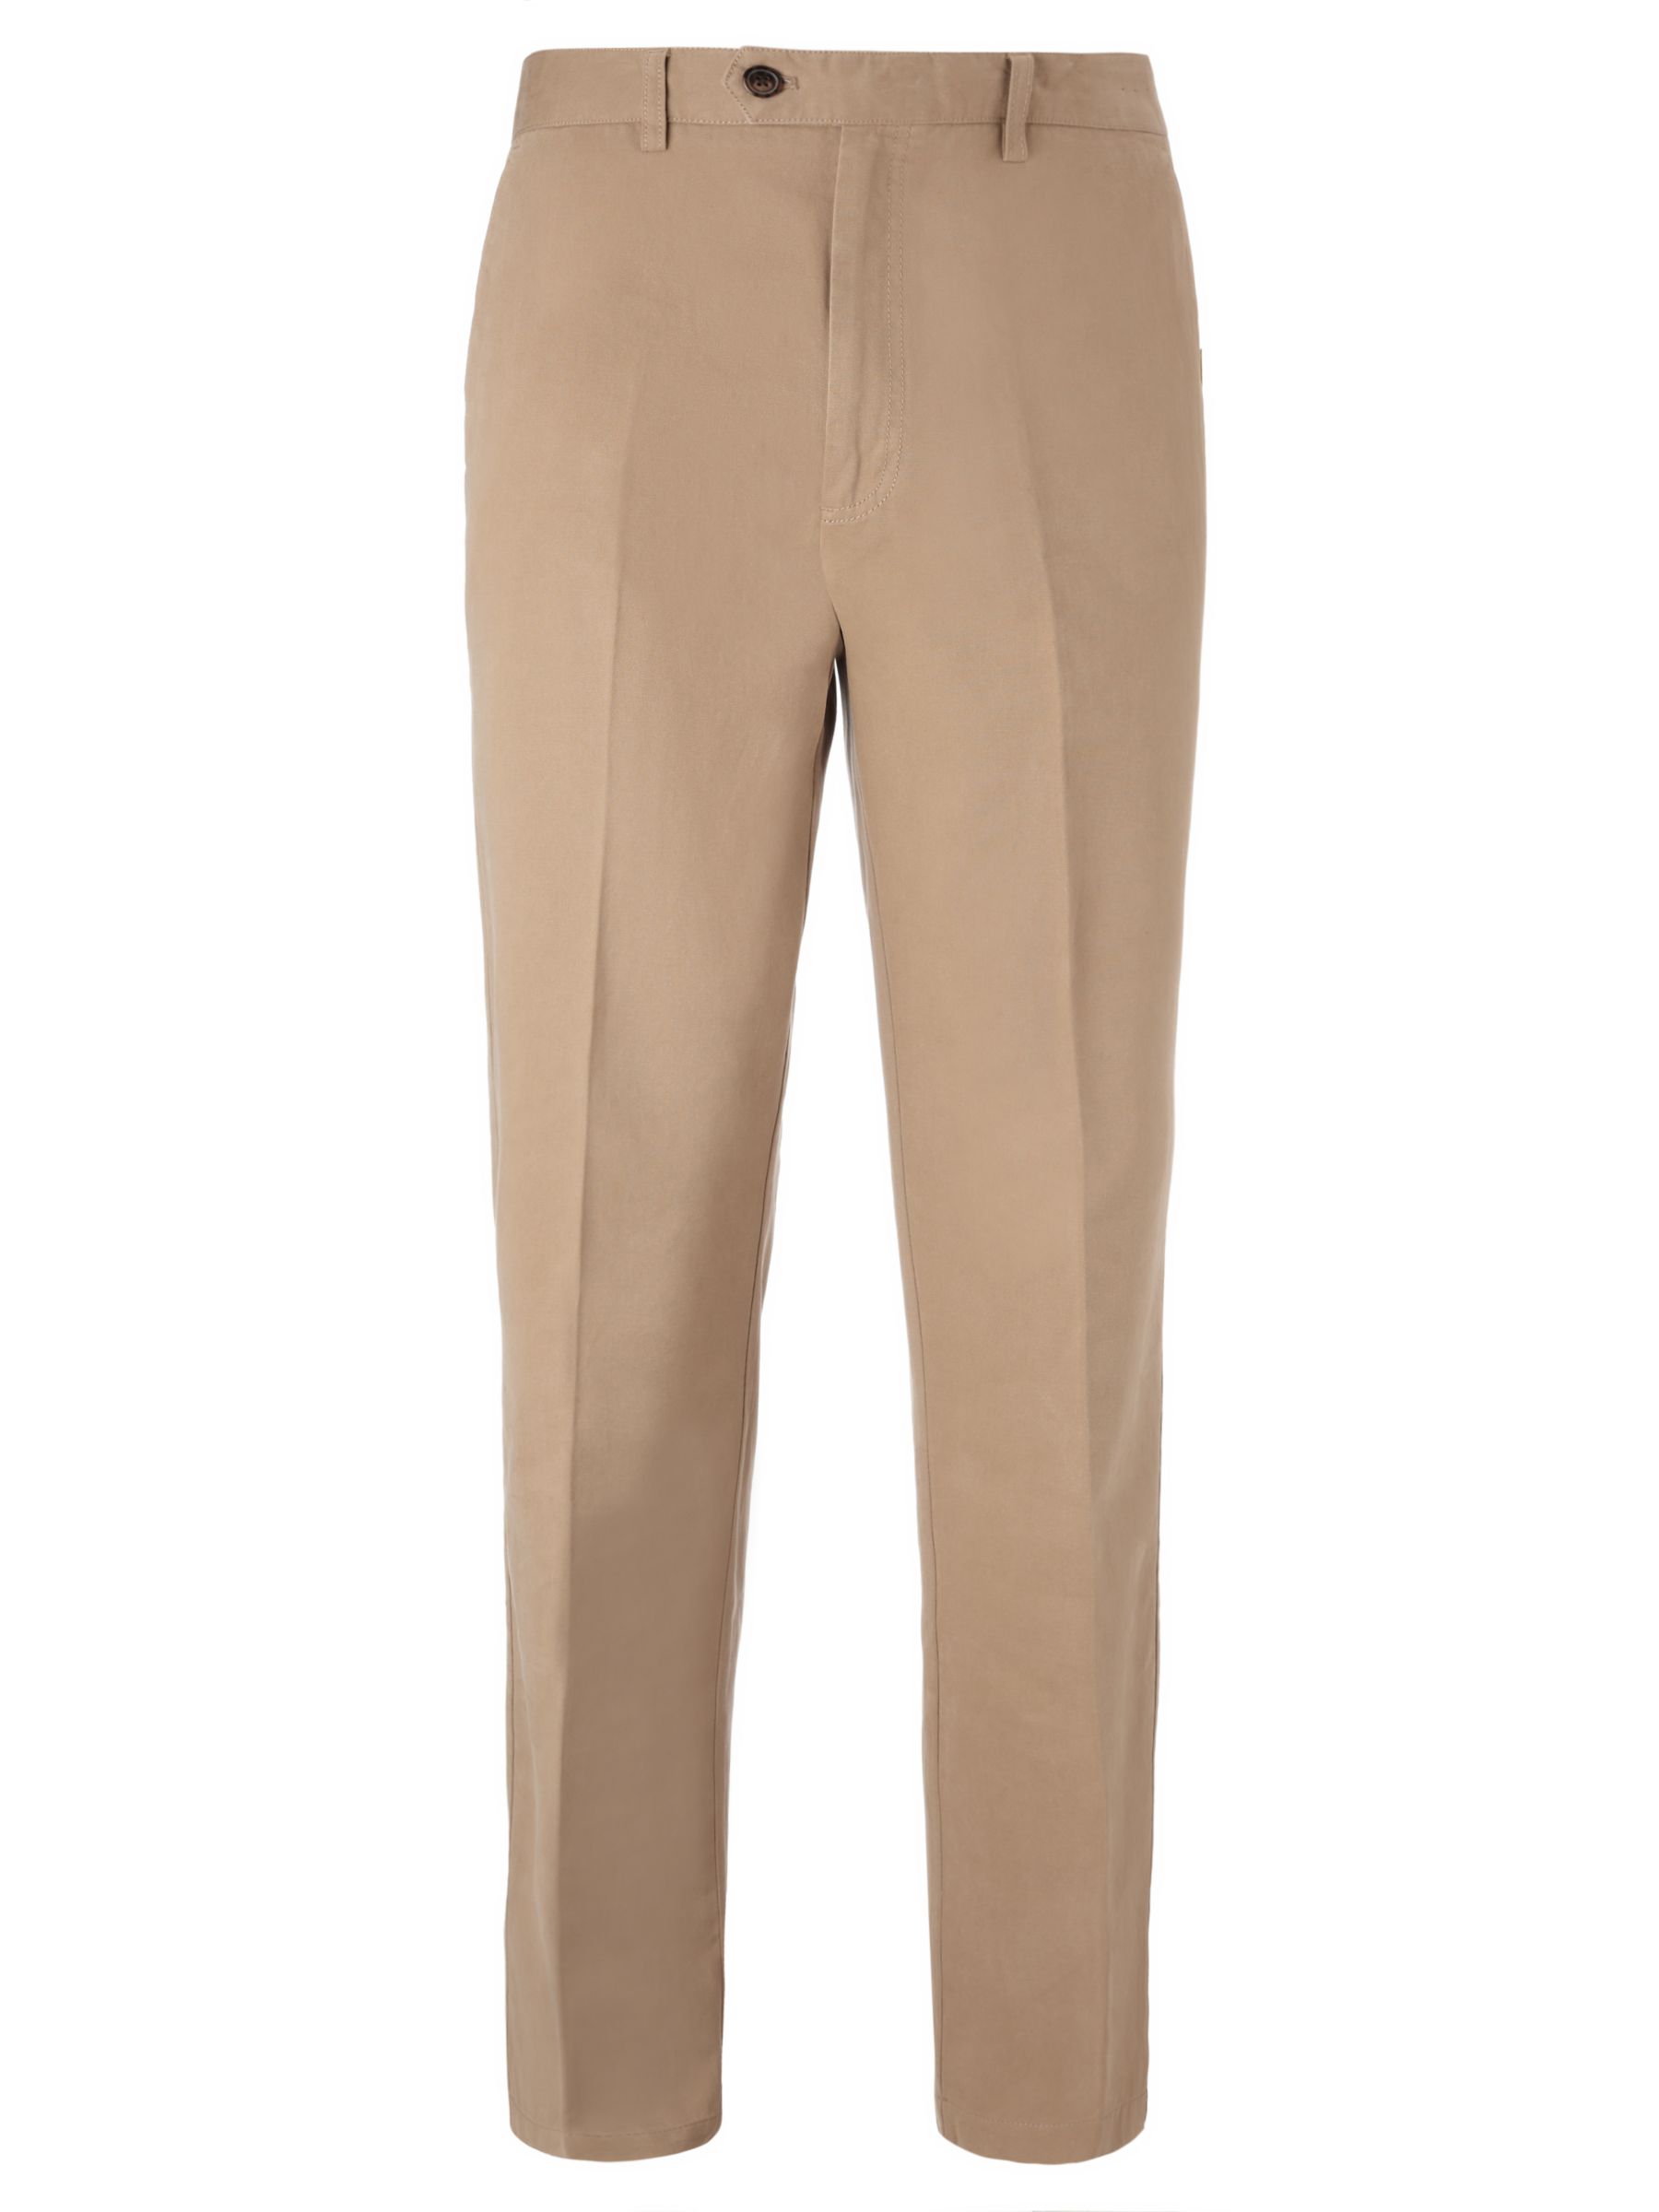 John Lewis & Partners Wrinkle Free Flat Front Trousers, Stone, 34L